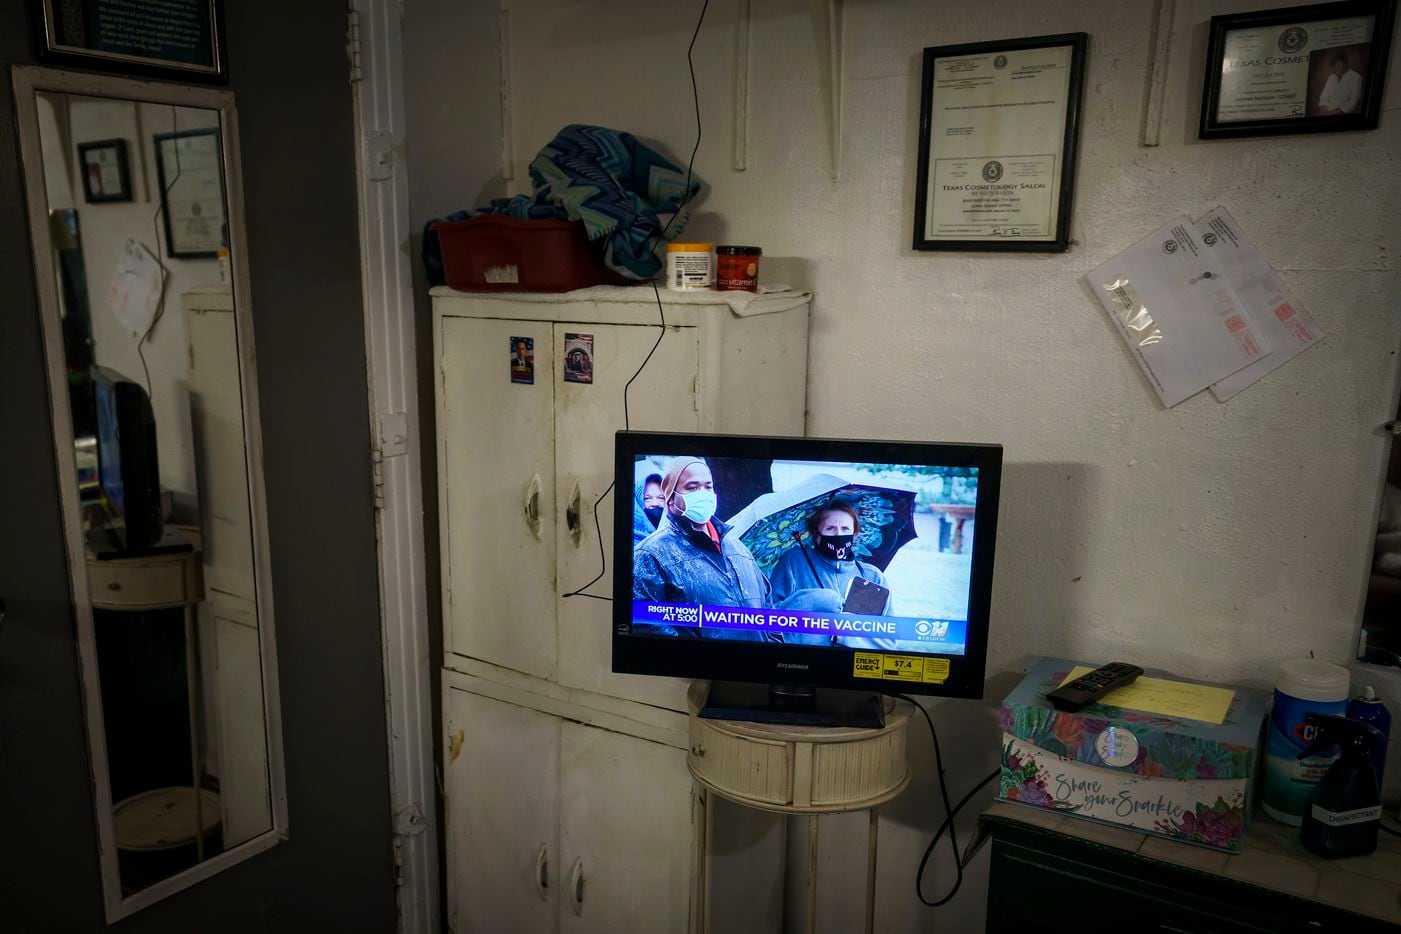 The television in her Earnestine Tarrant’s hair salon in South Dallas show news of people hoping to get the COVID-19 vaccine.